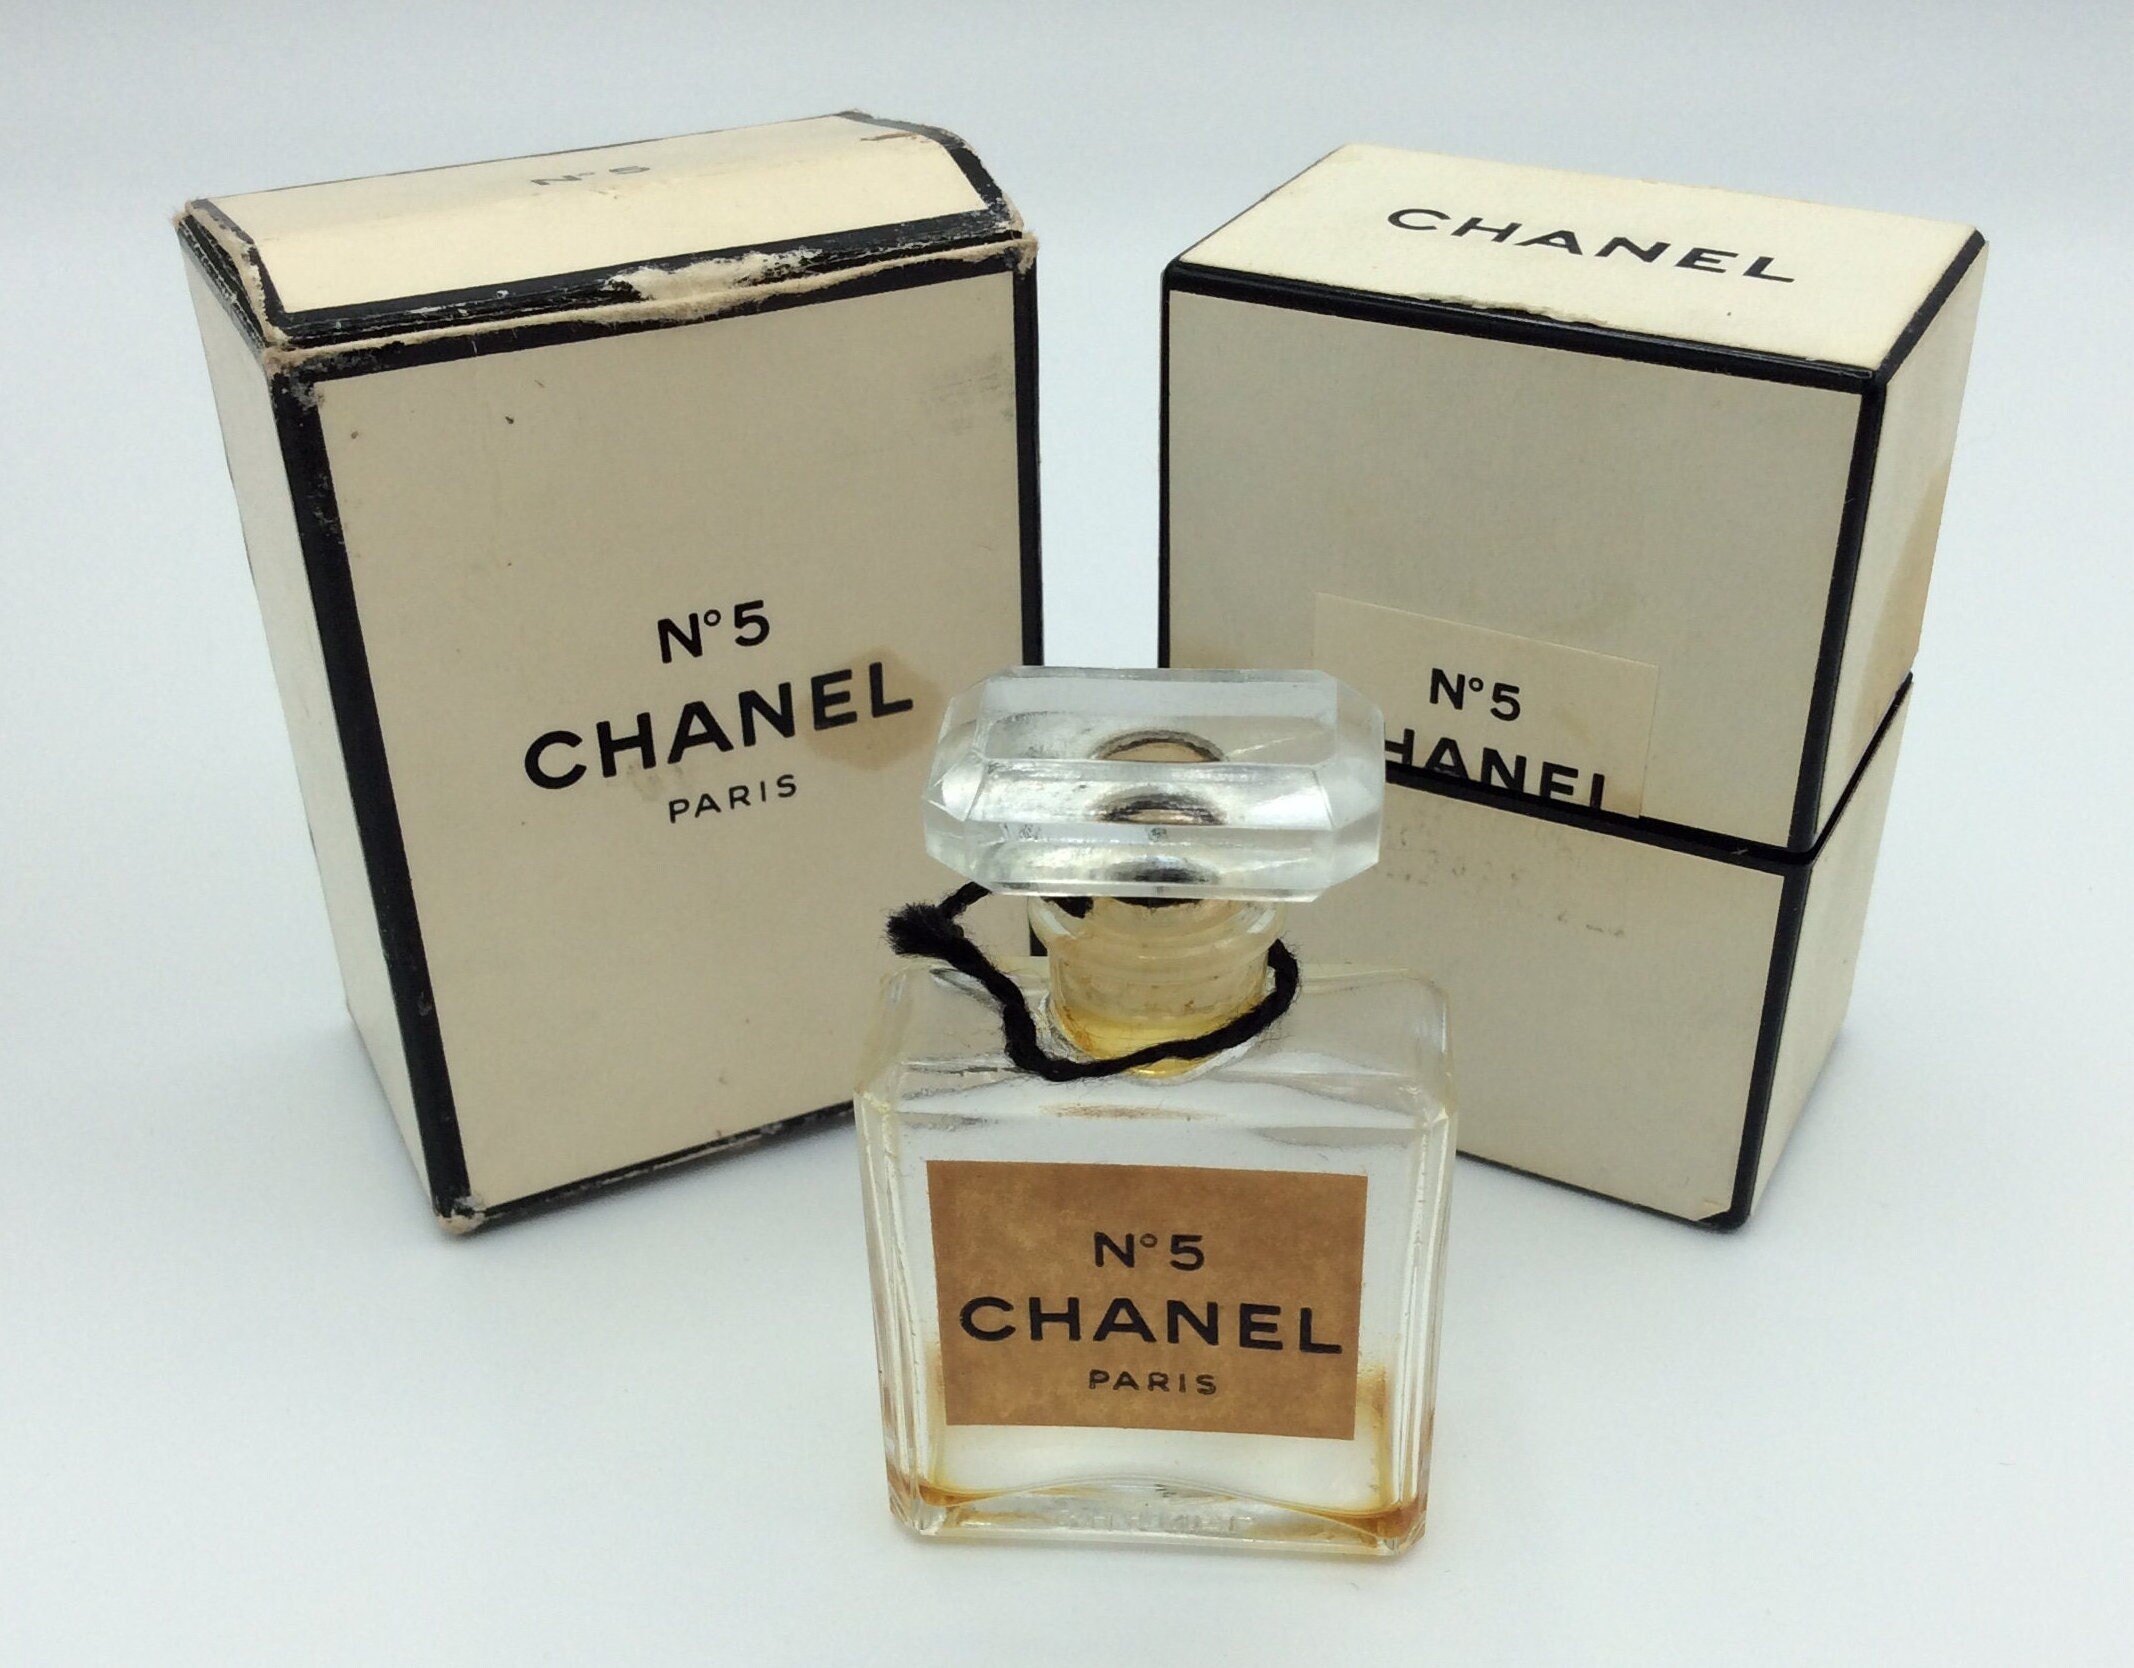 VINTAGE OLD RARE PERFUME BOTTLE FRAGRANCE CHANEL N° 5 WITH BOX 7.5 ML  MINIATURE